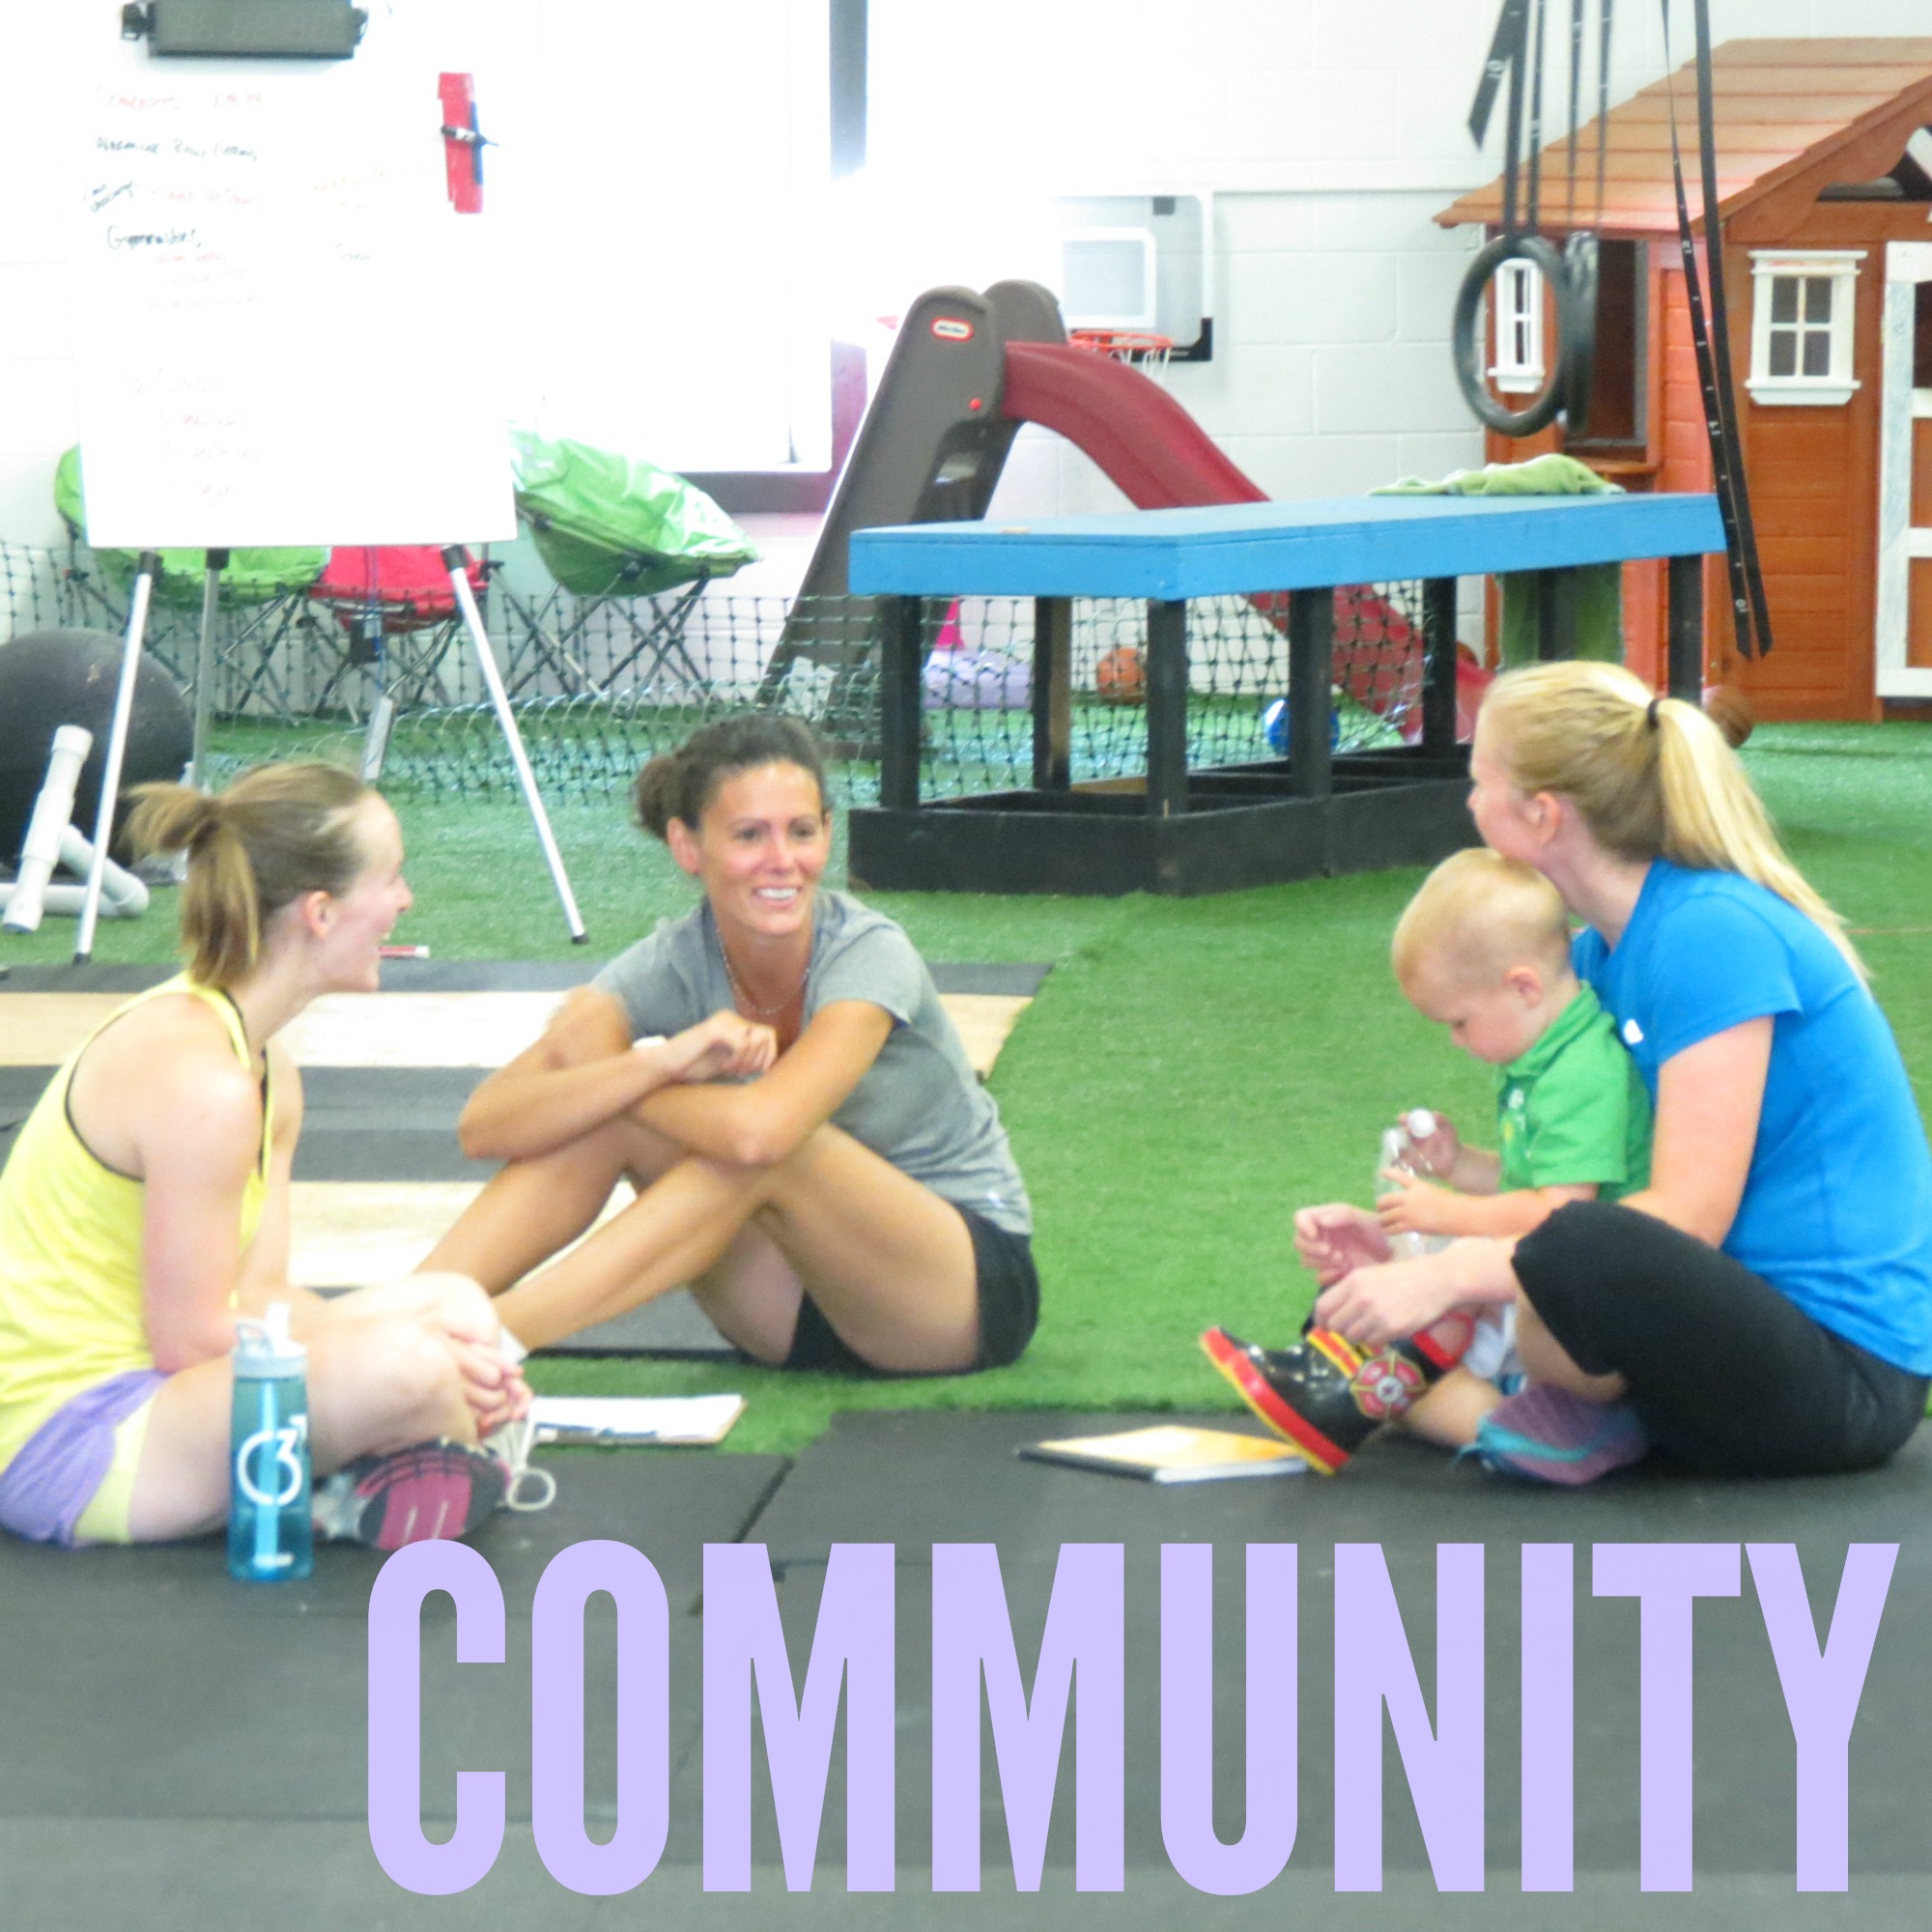 The community at CrossFit Box. Three moms sitting with their kids aftet a workout.